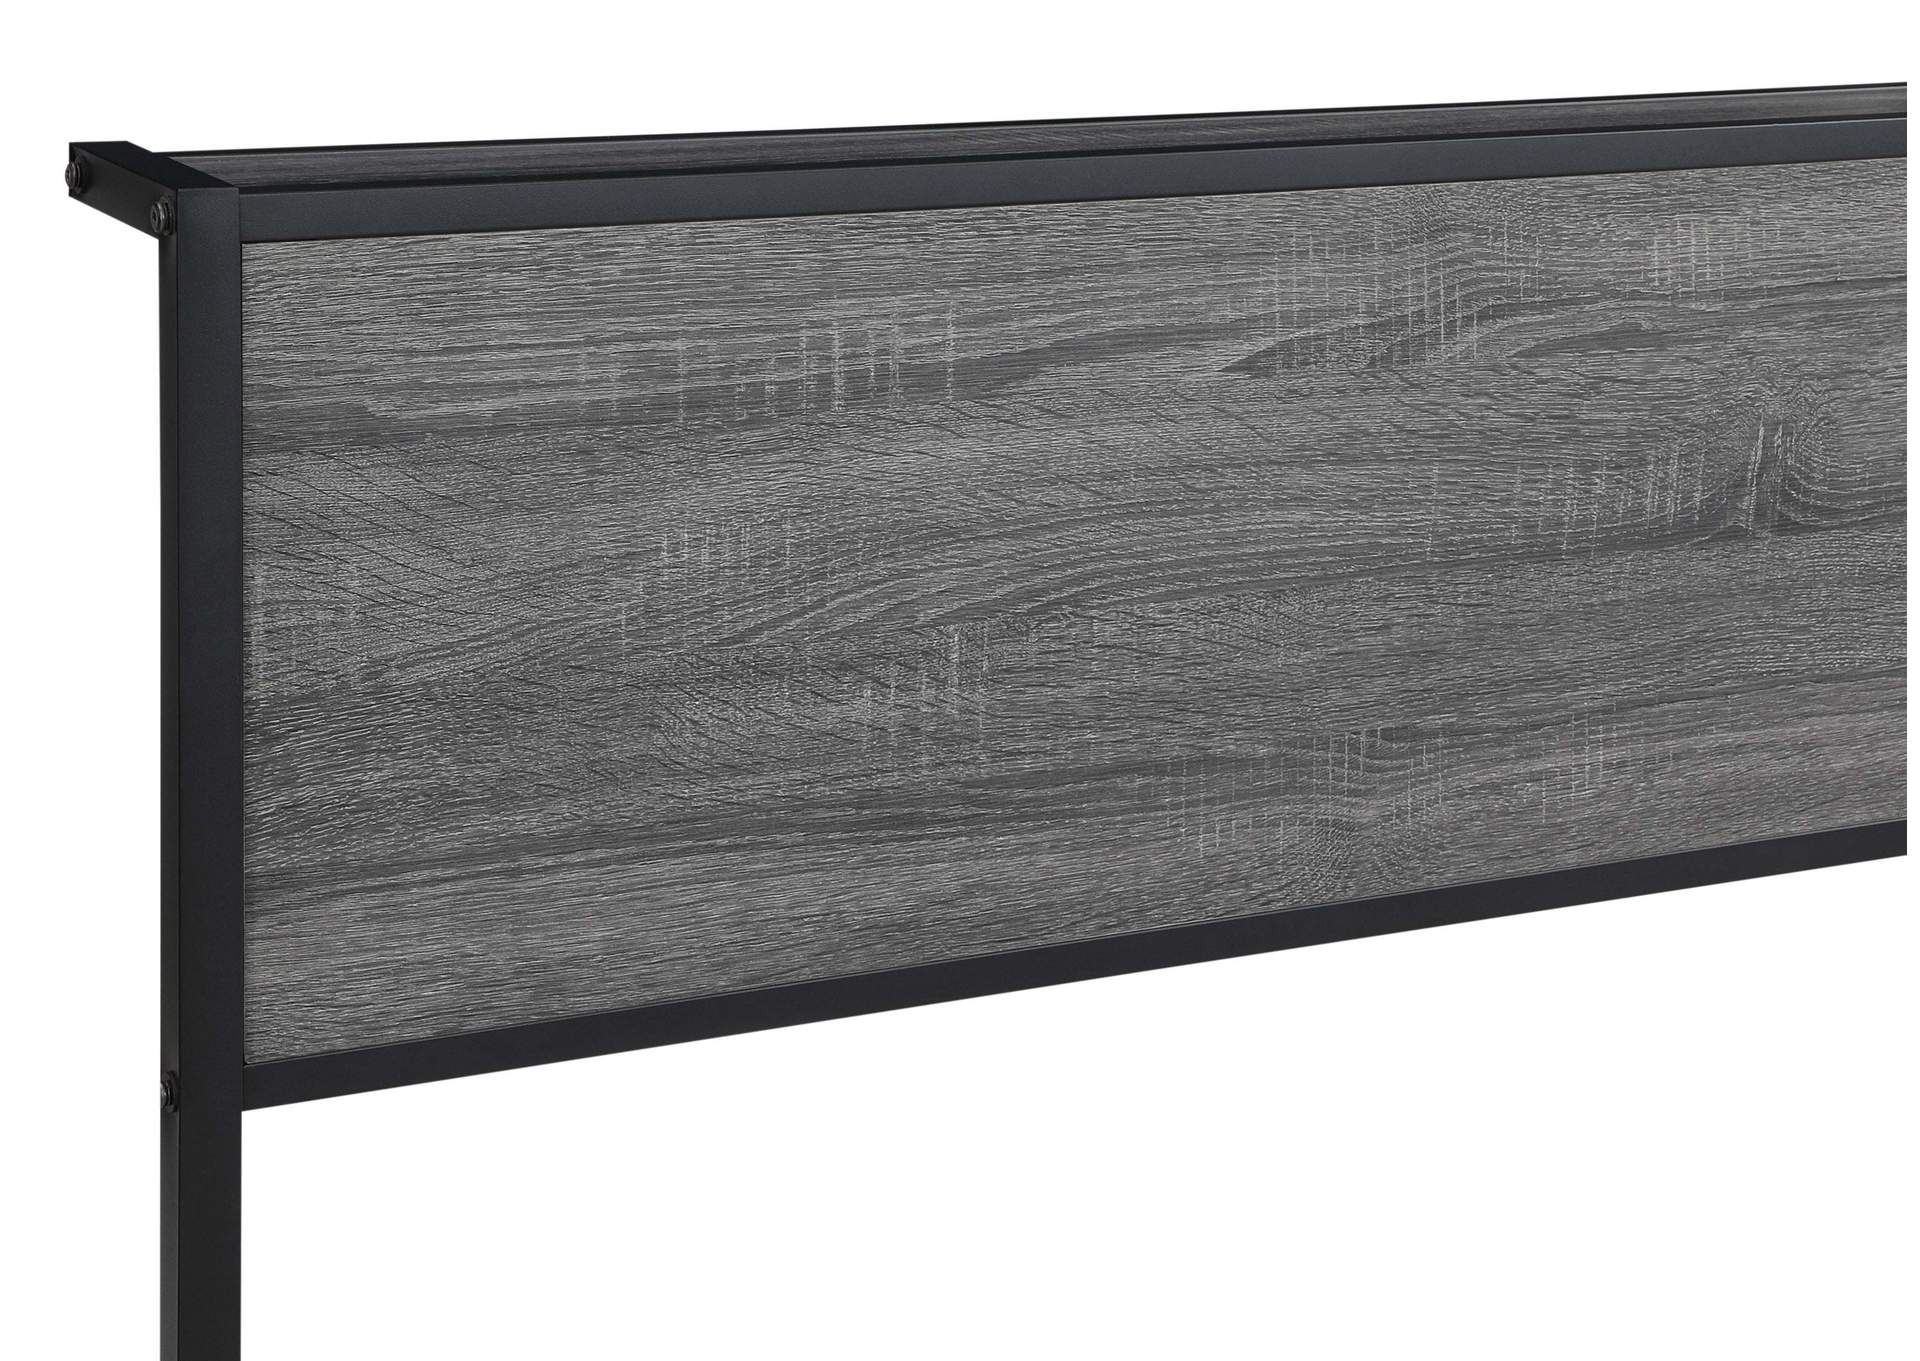 Ricky Queen Platform Bed Grey and Black,Coaster Furniture